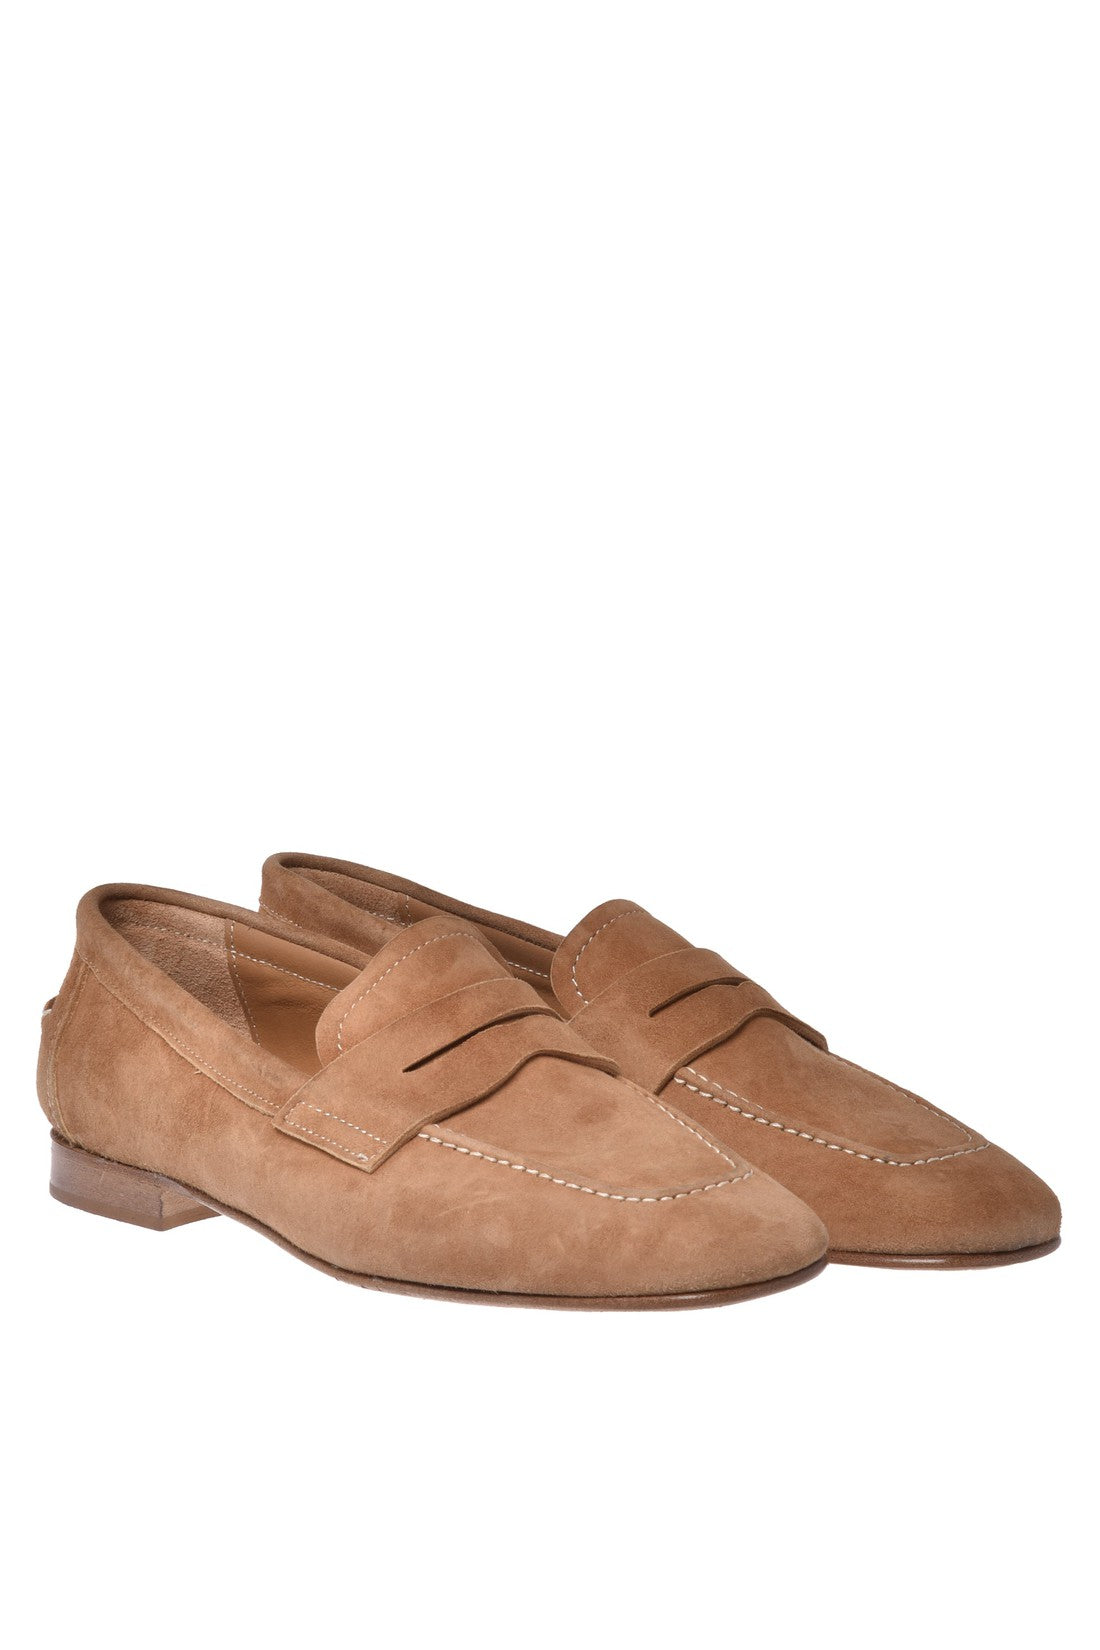 BALDININI-OUTLET-SALE-Tan-suede-loafer-Halbschuhe-ARCHIVE-COLLECTION-3_11e1f457-2131-4a65-a0a6-d840c73b68bc.jpg